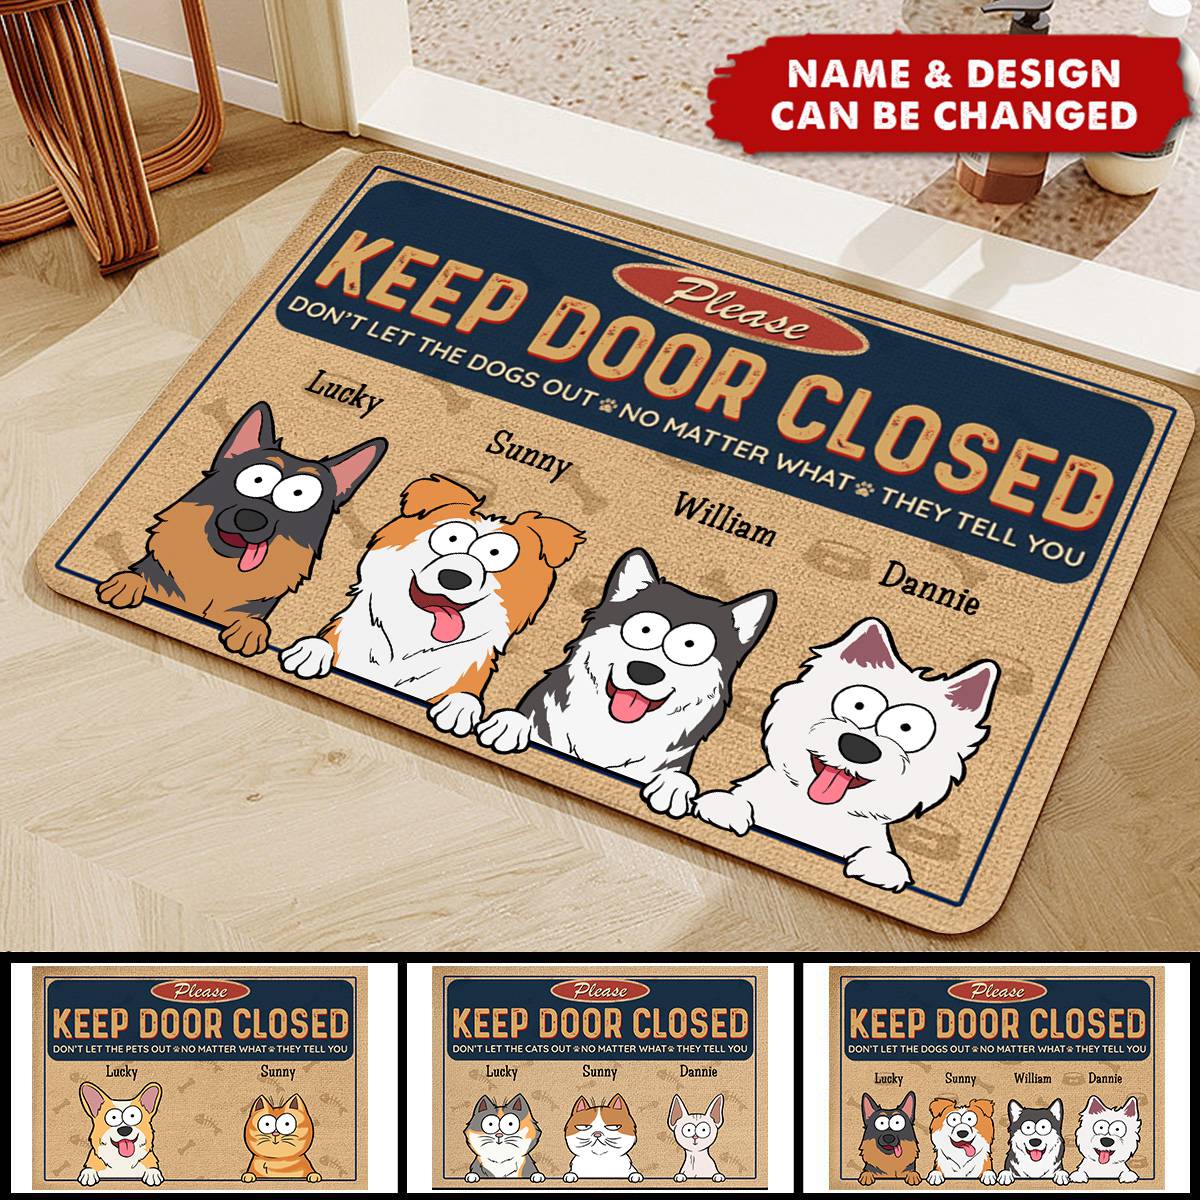 Keep Door Closed Cats Planning Escape - Dog & Cat Personalized Doormat - Gift For Pet Owners, Pet Lovers